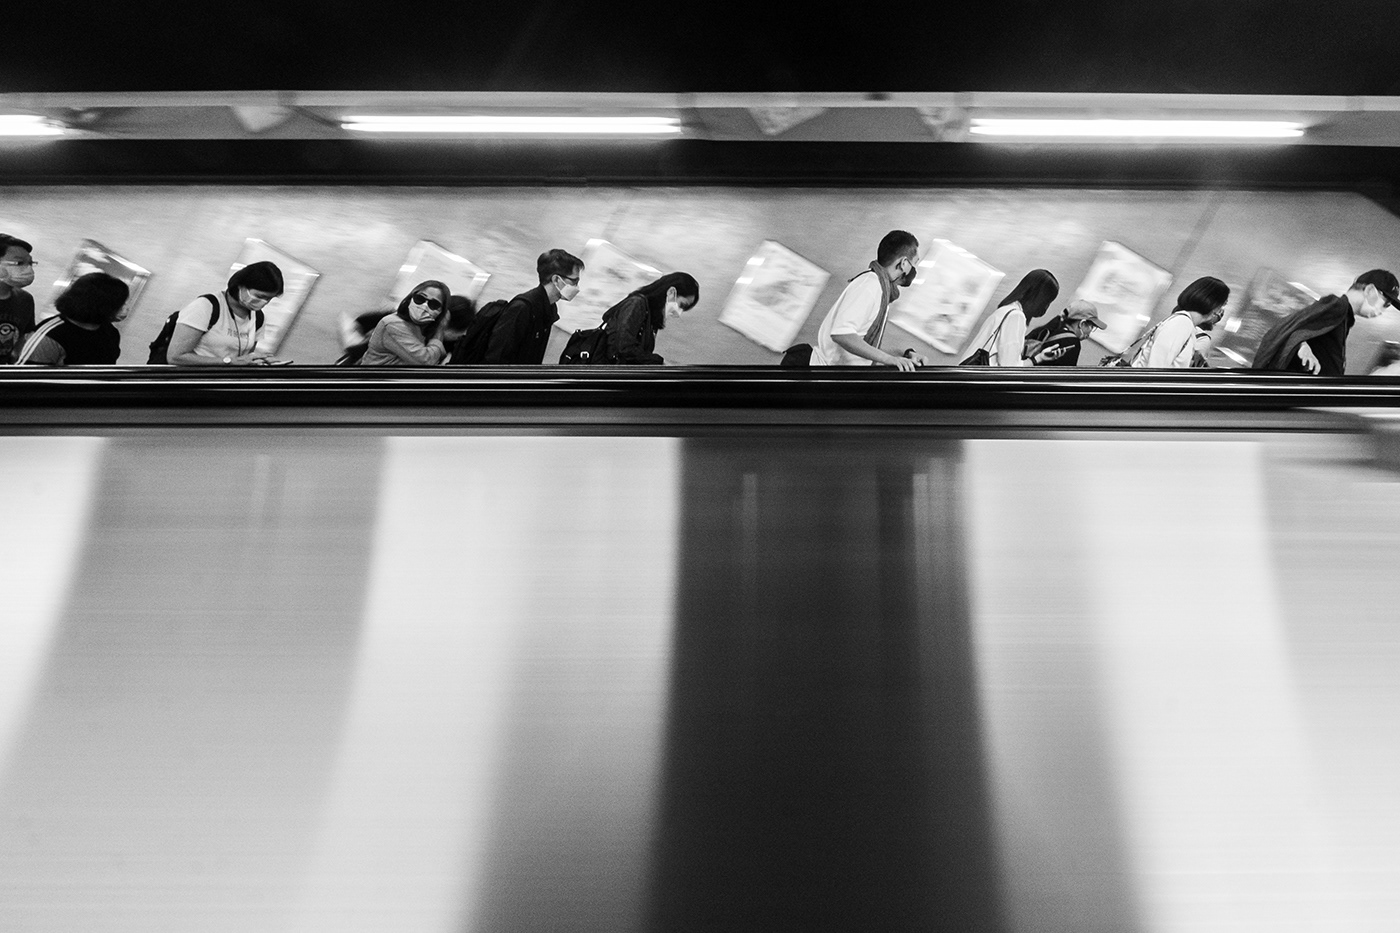 black and white city Hong Kong metro monochrome Street groups people Documentary  Photography 